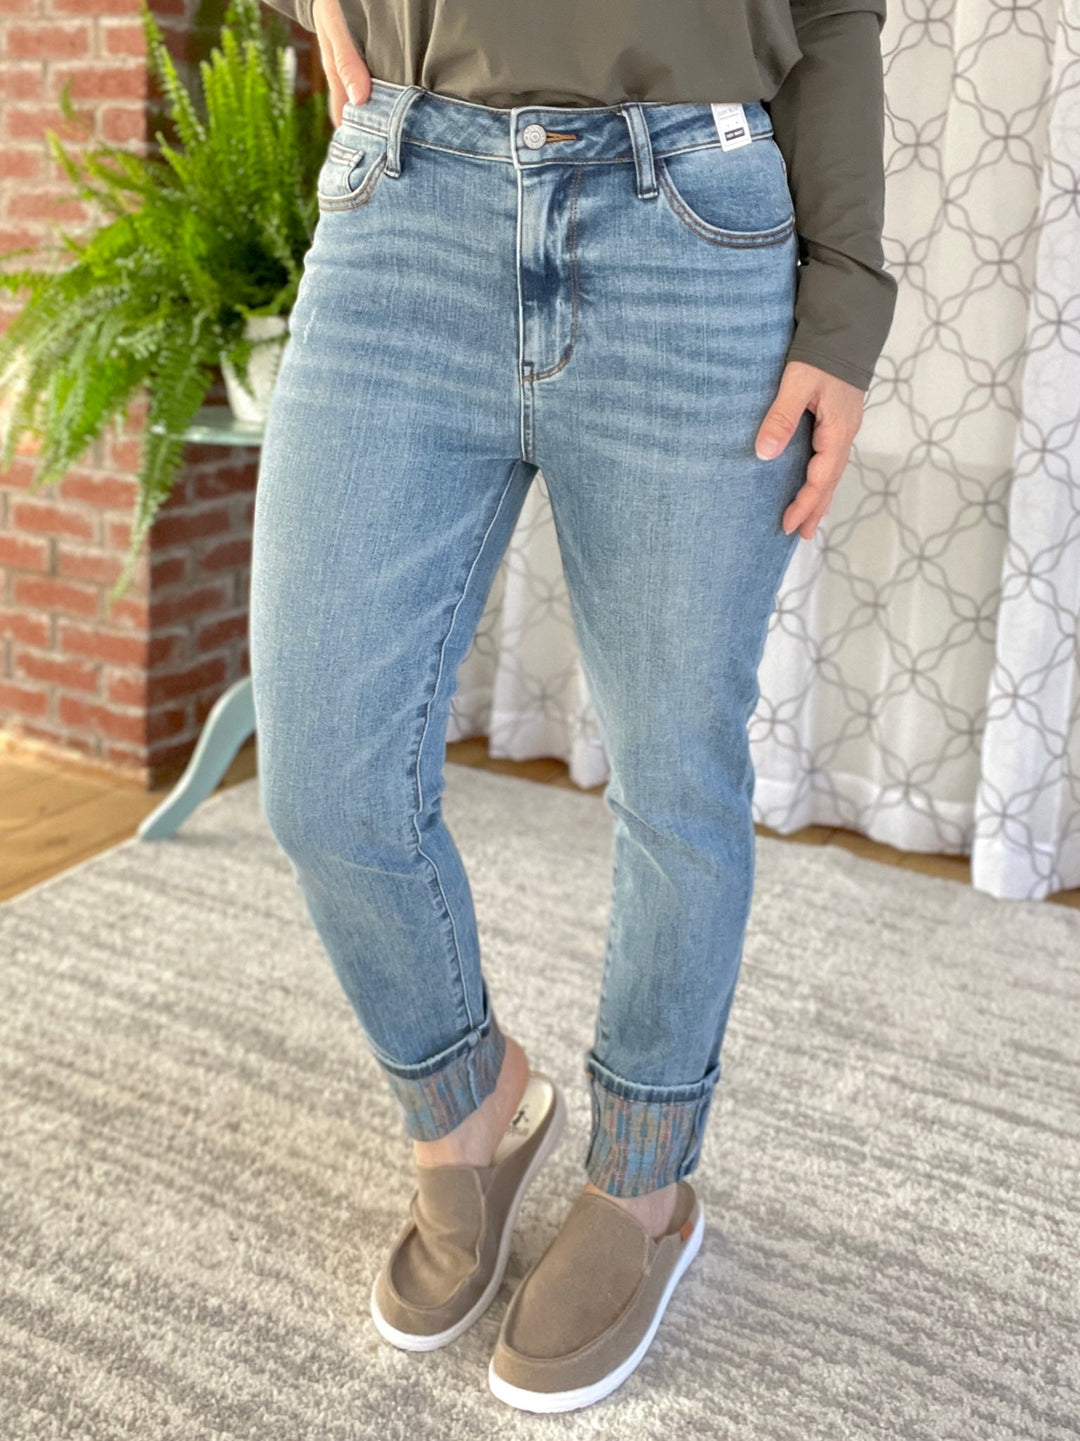 Southwestern Style Judy Blue Jeans-Judy Blue-Inspired by Justeen-Women's Clothing Boutique in Chicago, Illinois